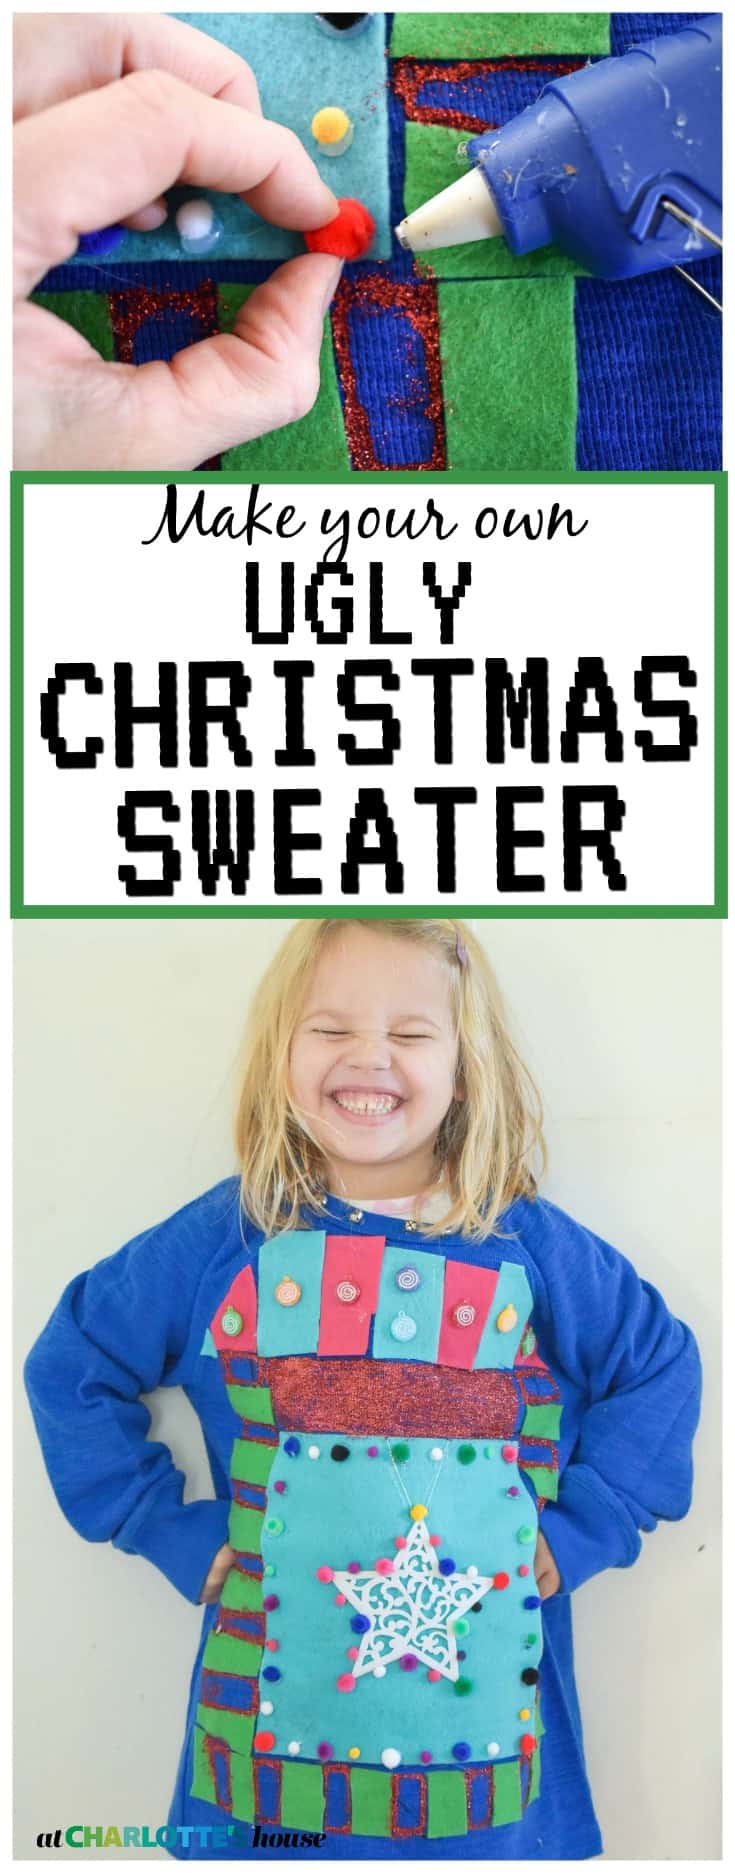 Make your own ugly christmas sweater